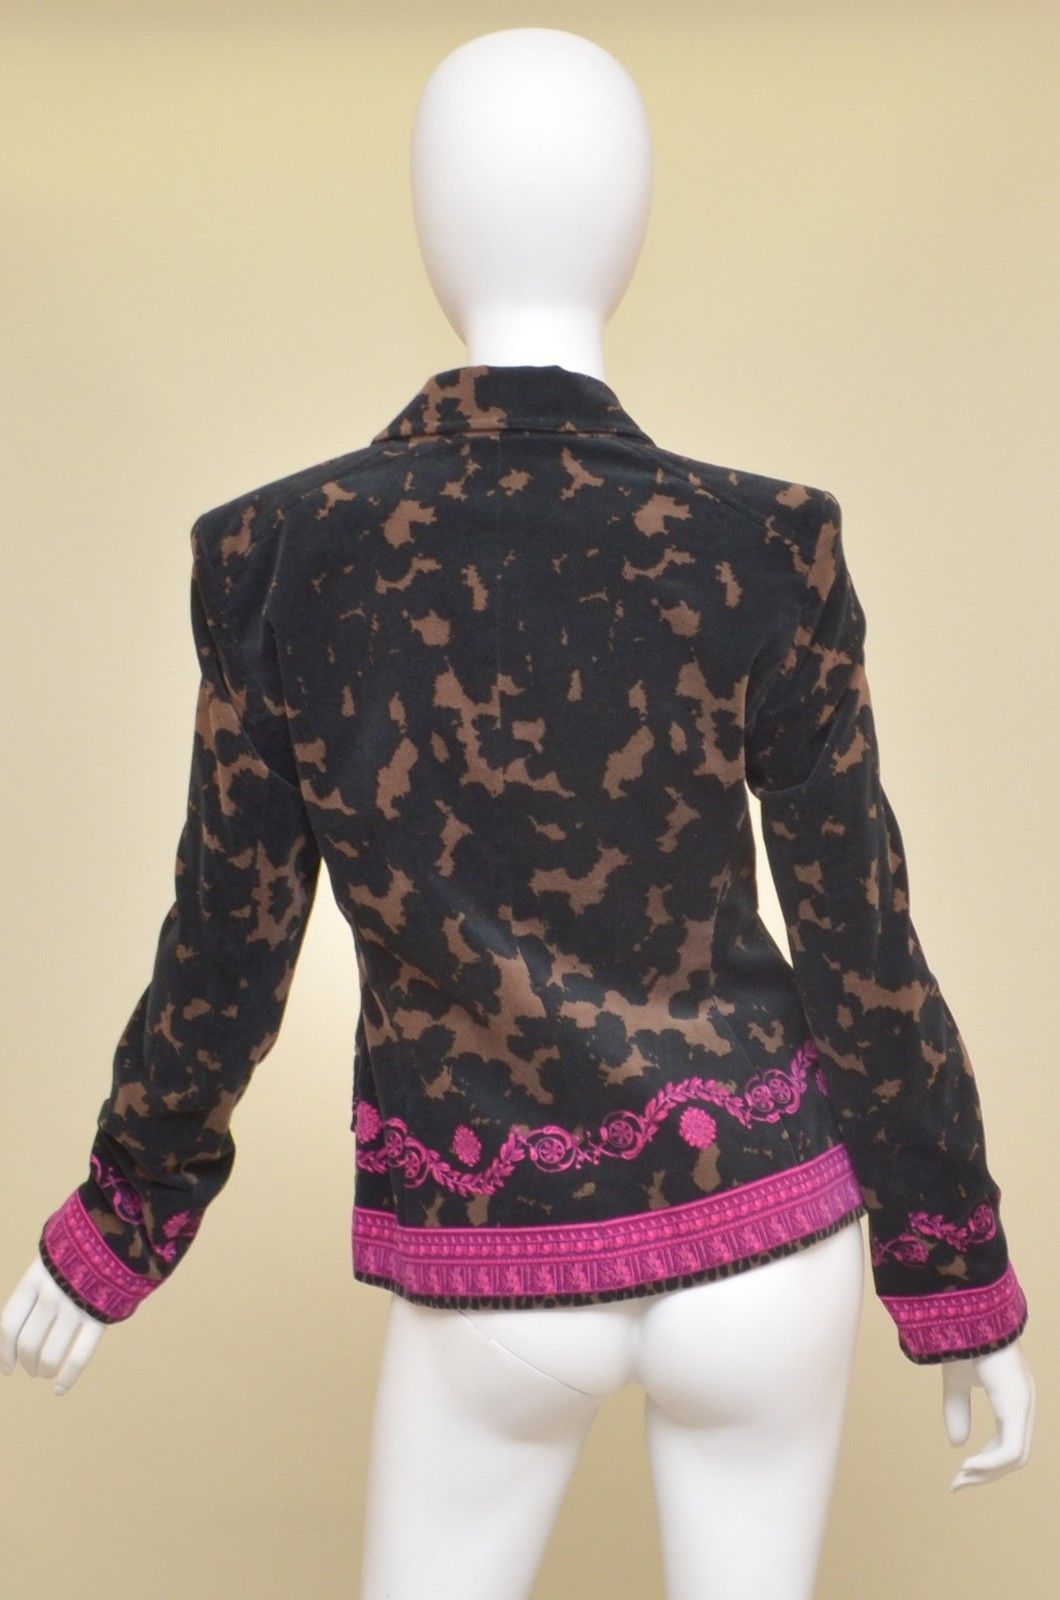 Vintage Versace Jacket is a size 42, US 8. Features black, brown, and fuchsia velvet, gold-tone Medusa head button closures, Medusa print throughout, two front flap pockets, fully lined, and in EXCELLENT condition!

Measurements: 
Bust -